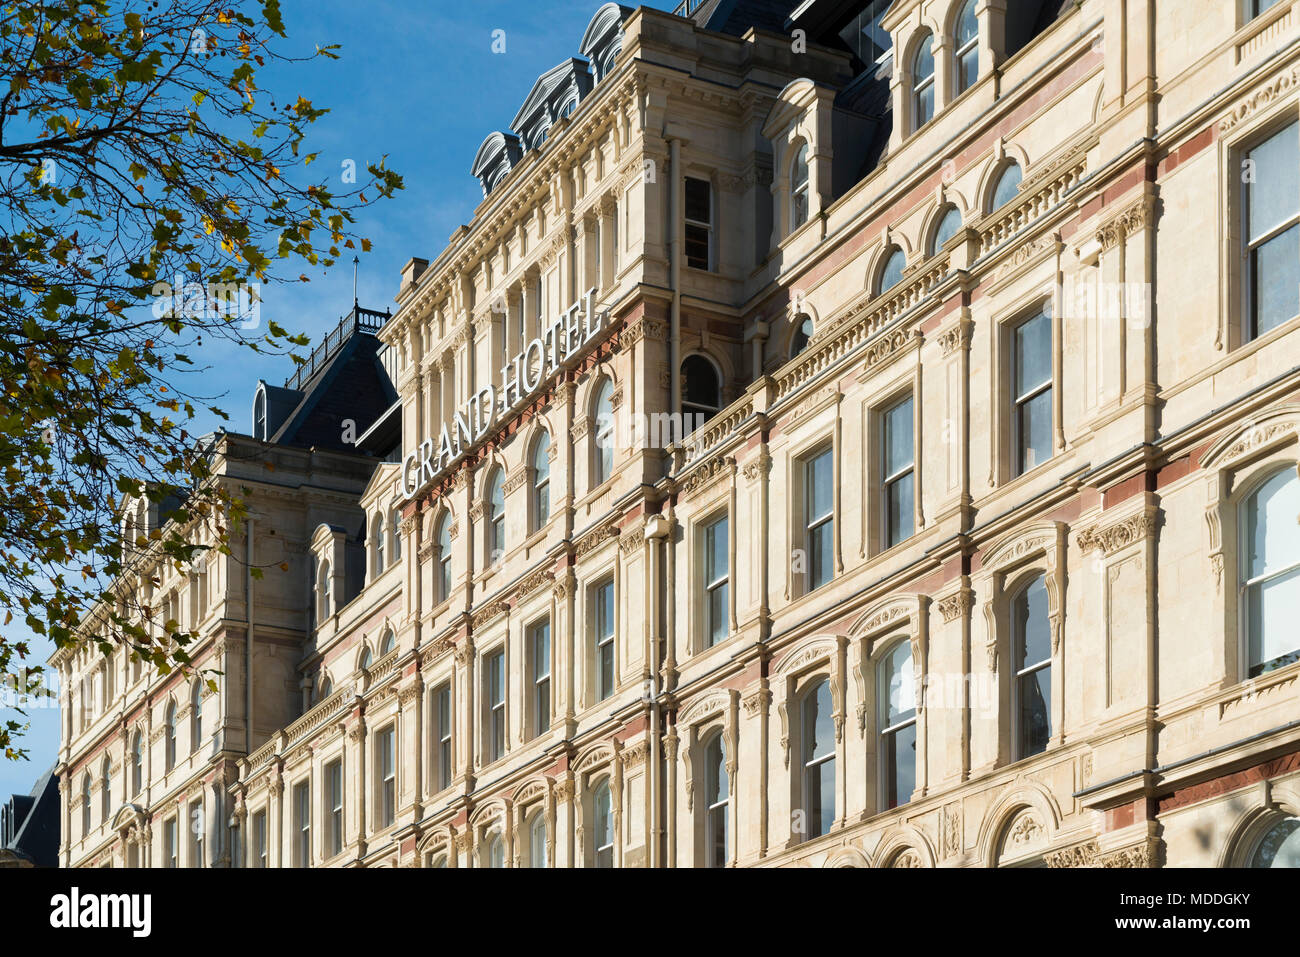 The newly refurbished Grand Hotel on Colmore Row, Birmingham Stock Photo